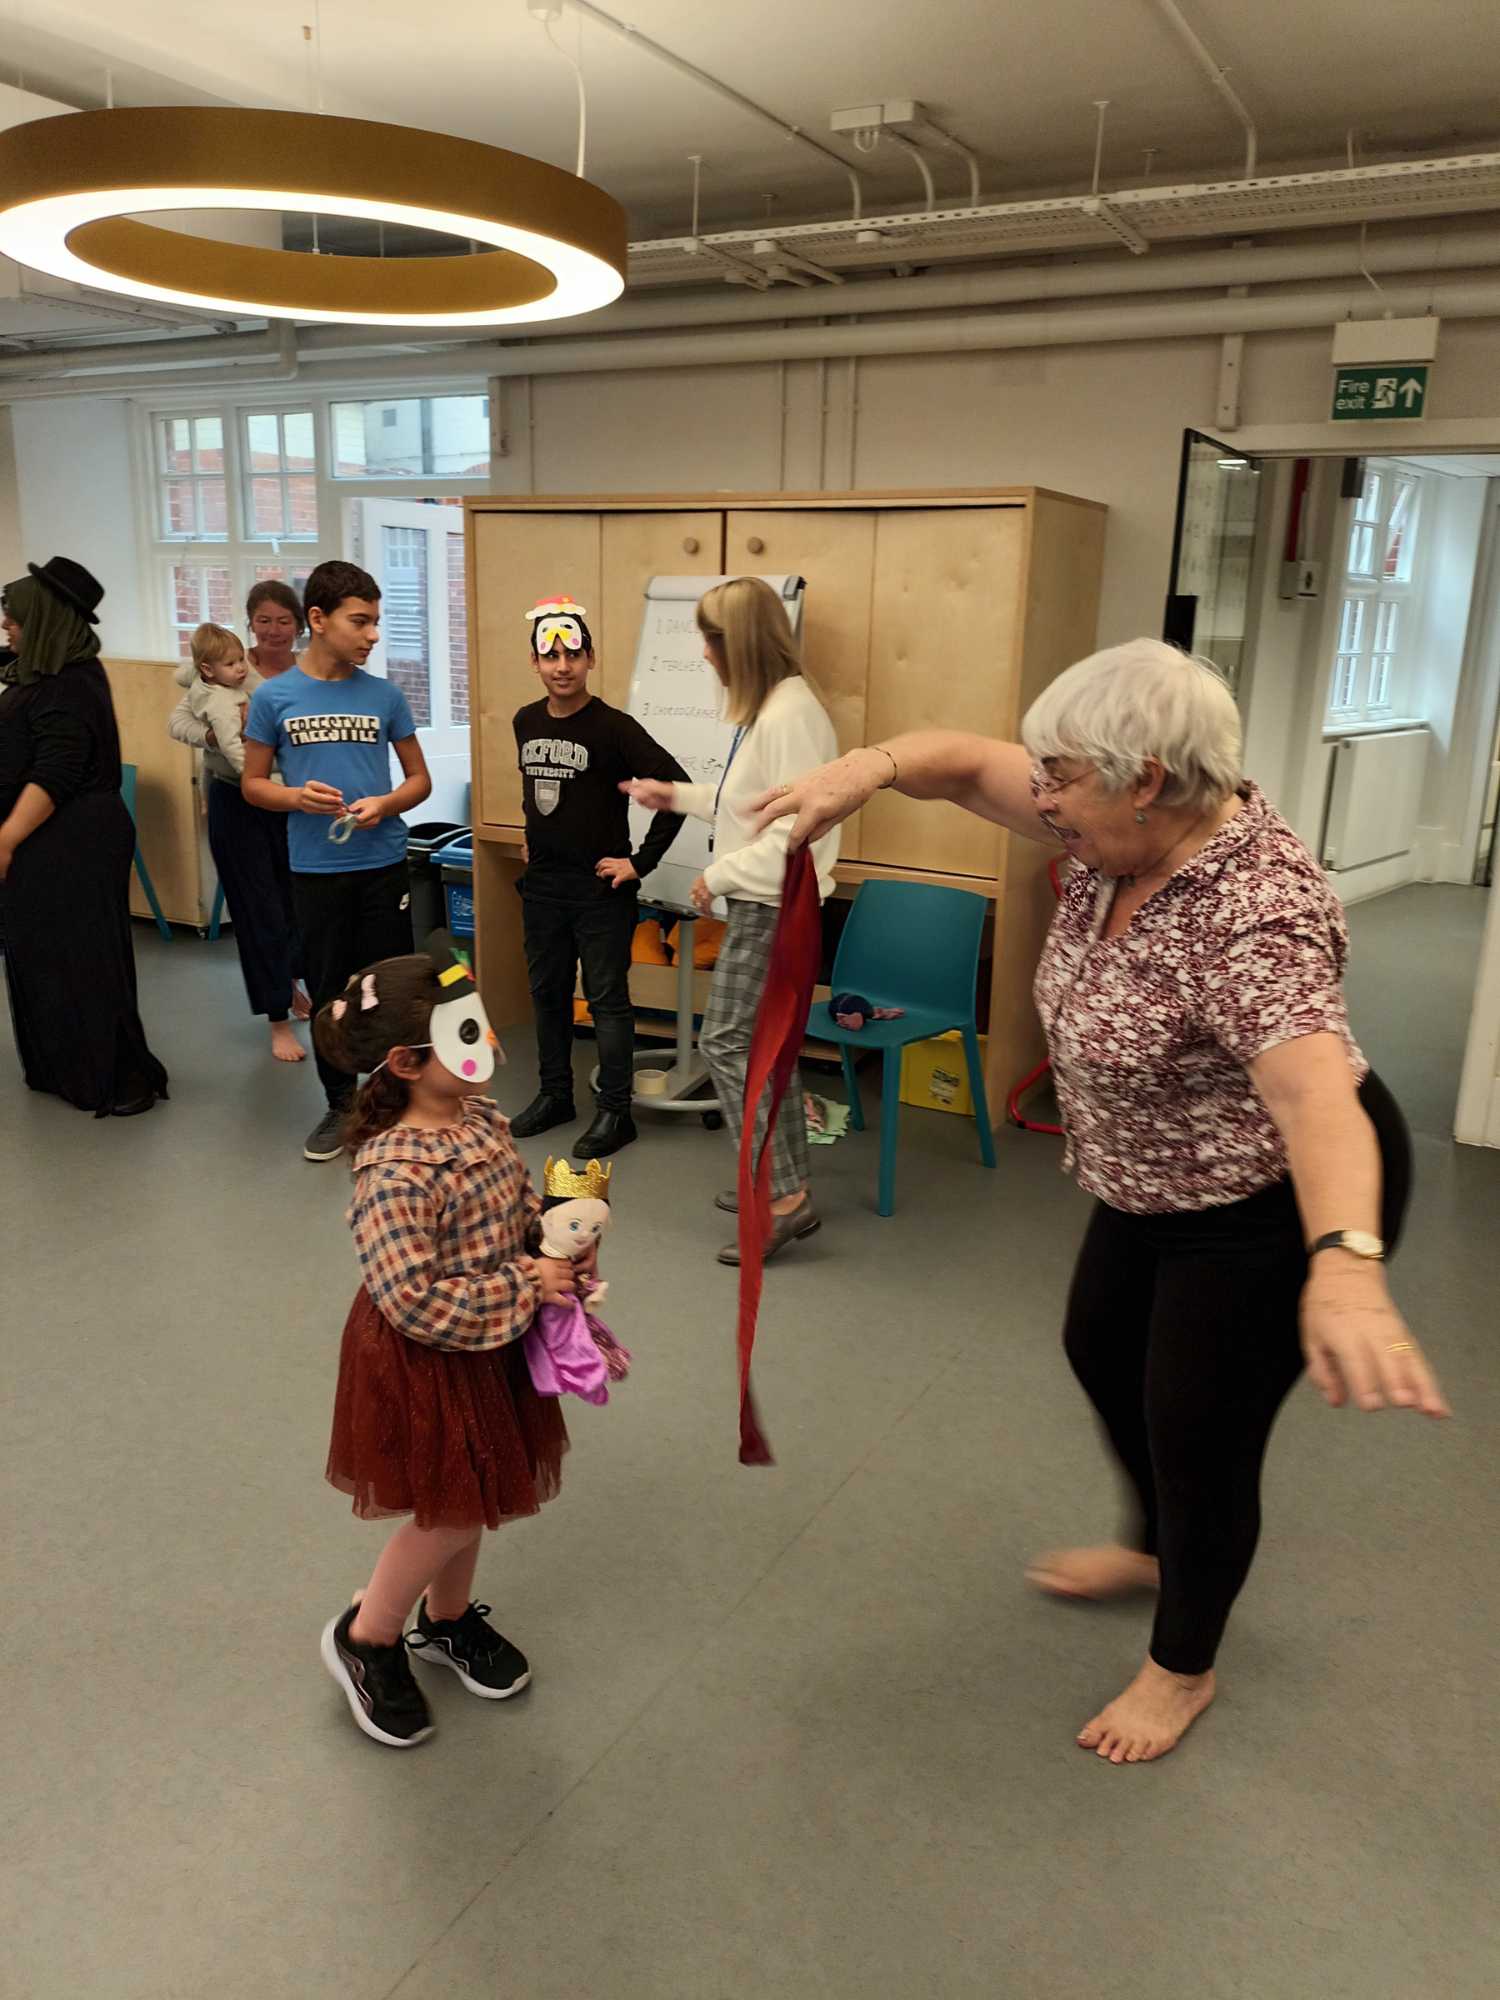 An older woman holds a streamer and entertains a young child, who is wearing an animal mask.